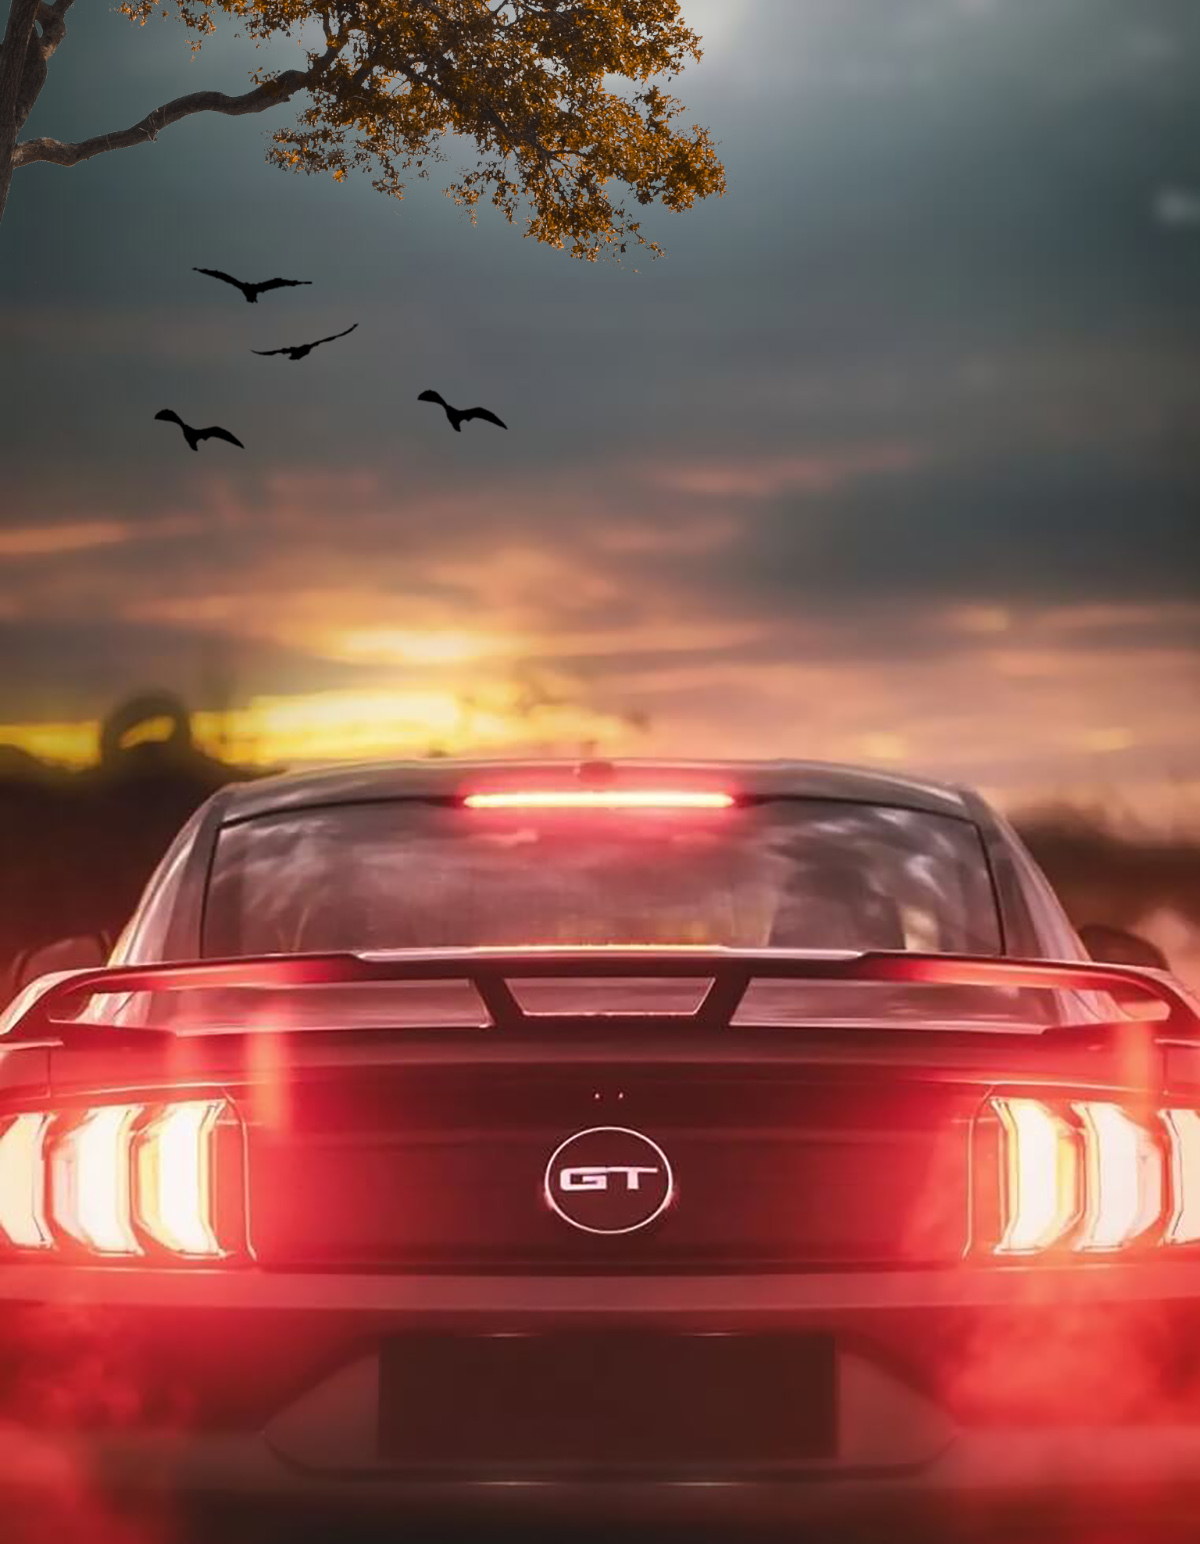 Car CB Editing Background Full HD Download Free by pngpexel on DeviantArt